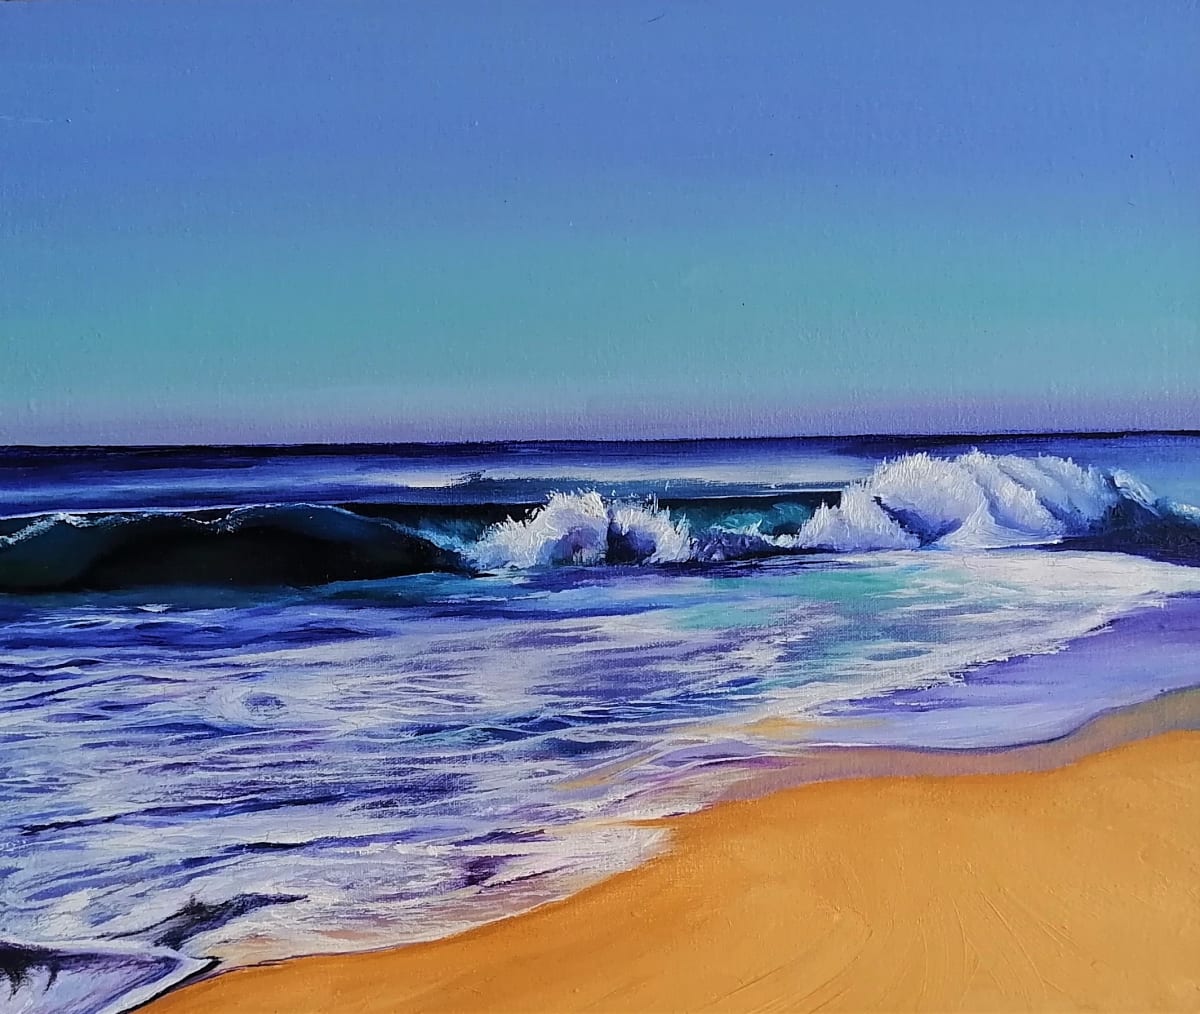 Noon at the Bacocho Beach, Oaxaca  Image: This is seascape I painted from Bacocho Beach, near to Puerto Escondido in the Coast of Oaxaca, Mexico.  The sun was really hitting the sand and waves were very strong hitting so hard the sand, too. This is a favorite place for relaxing, fishing and near to beaches where people surf.